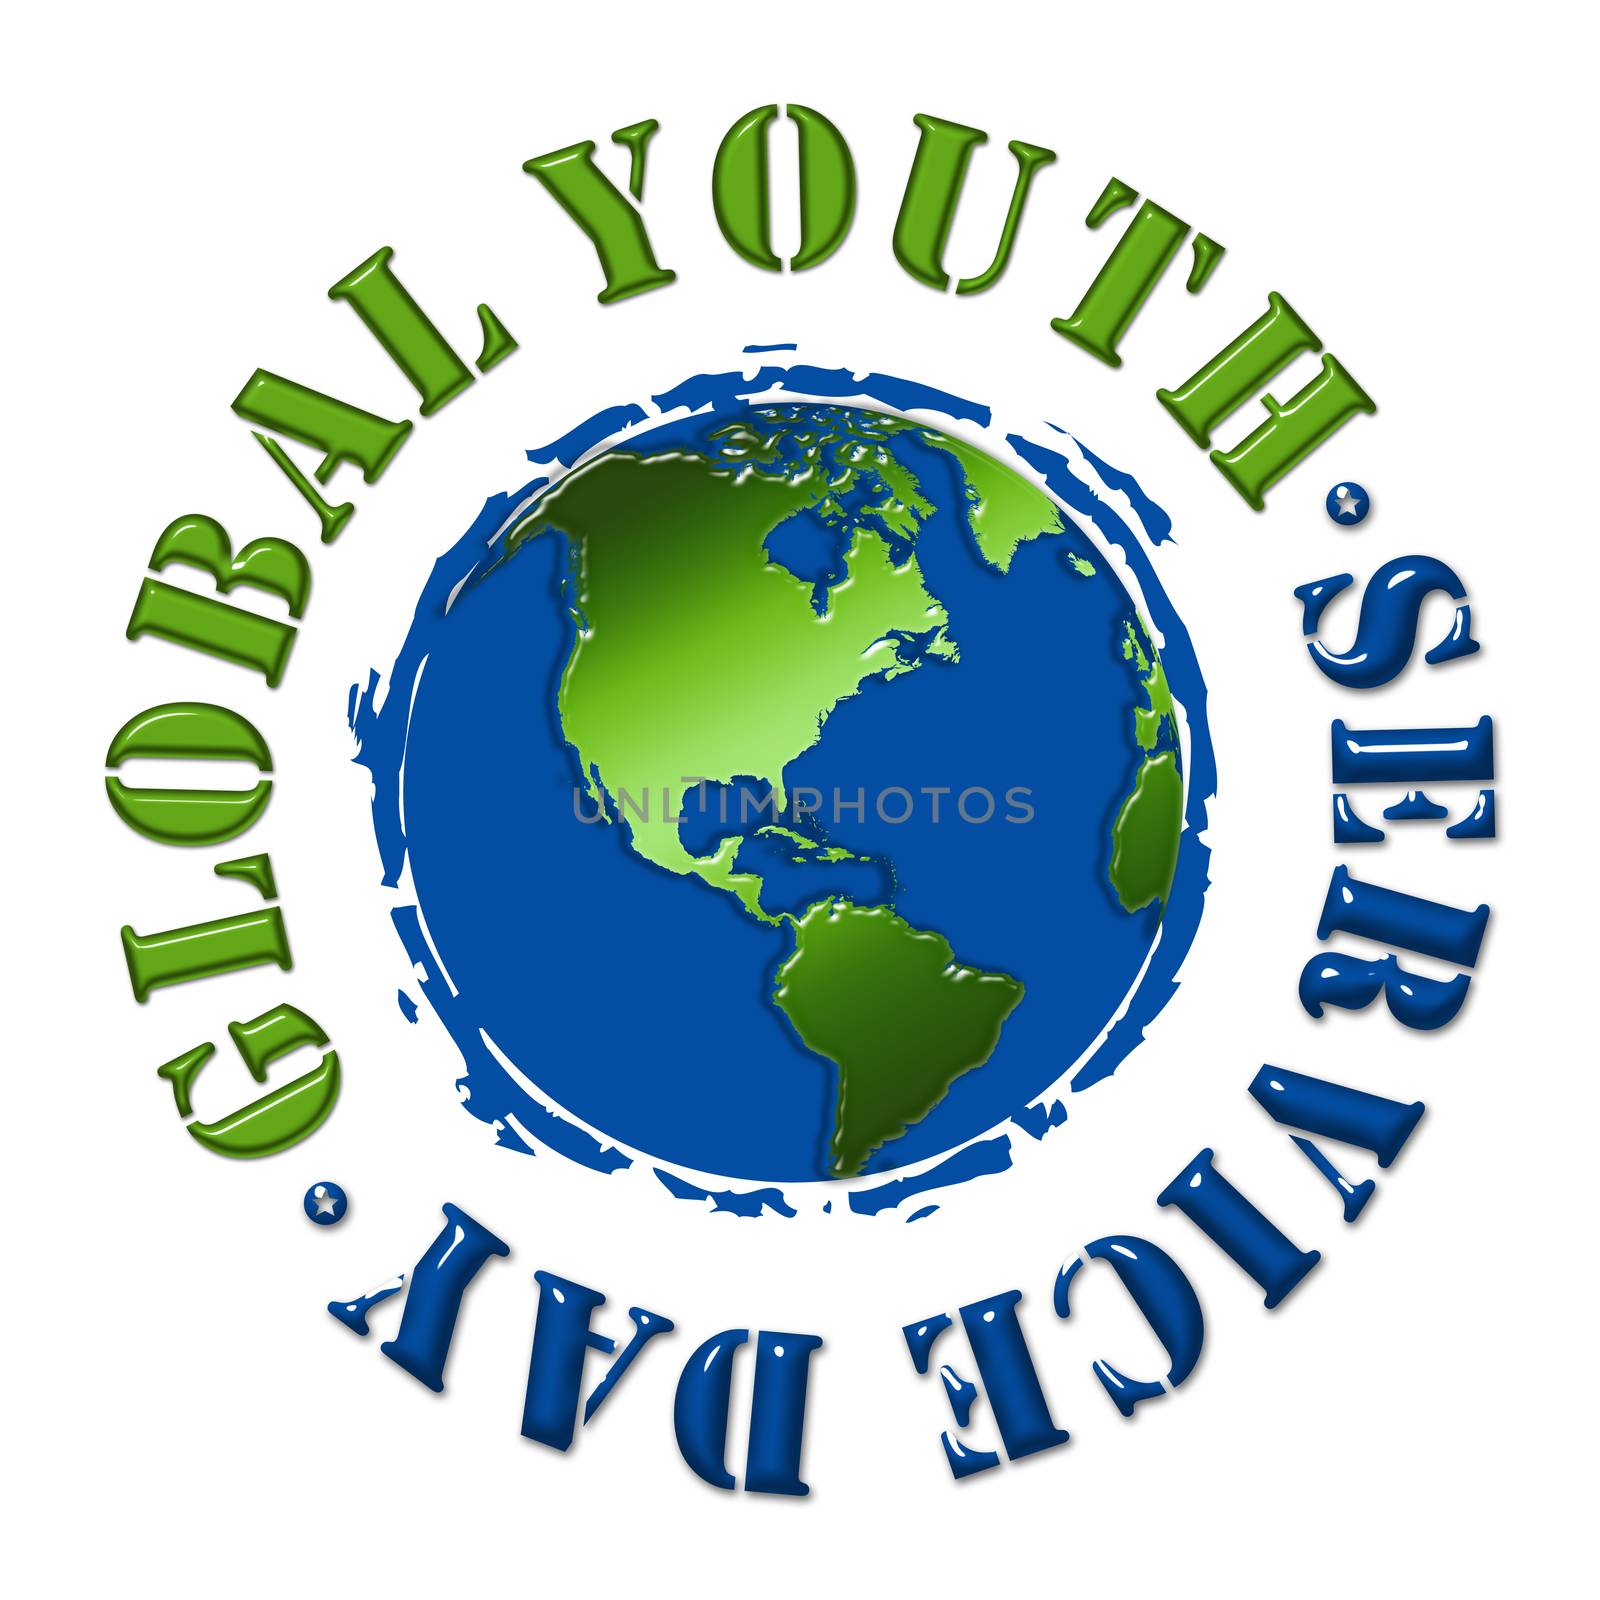 An abstract illustration on Global Youth Service Day